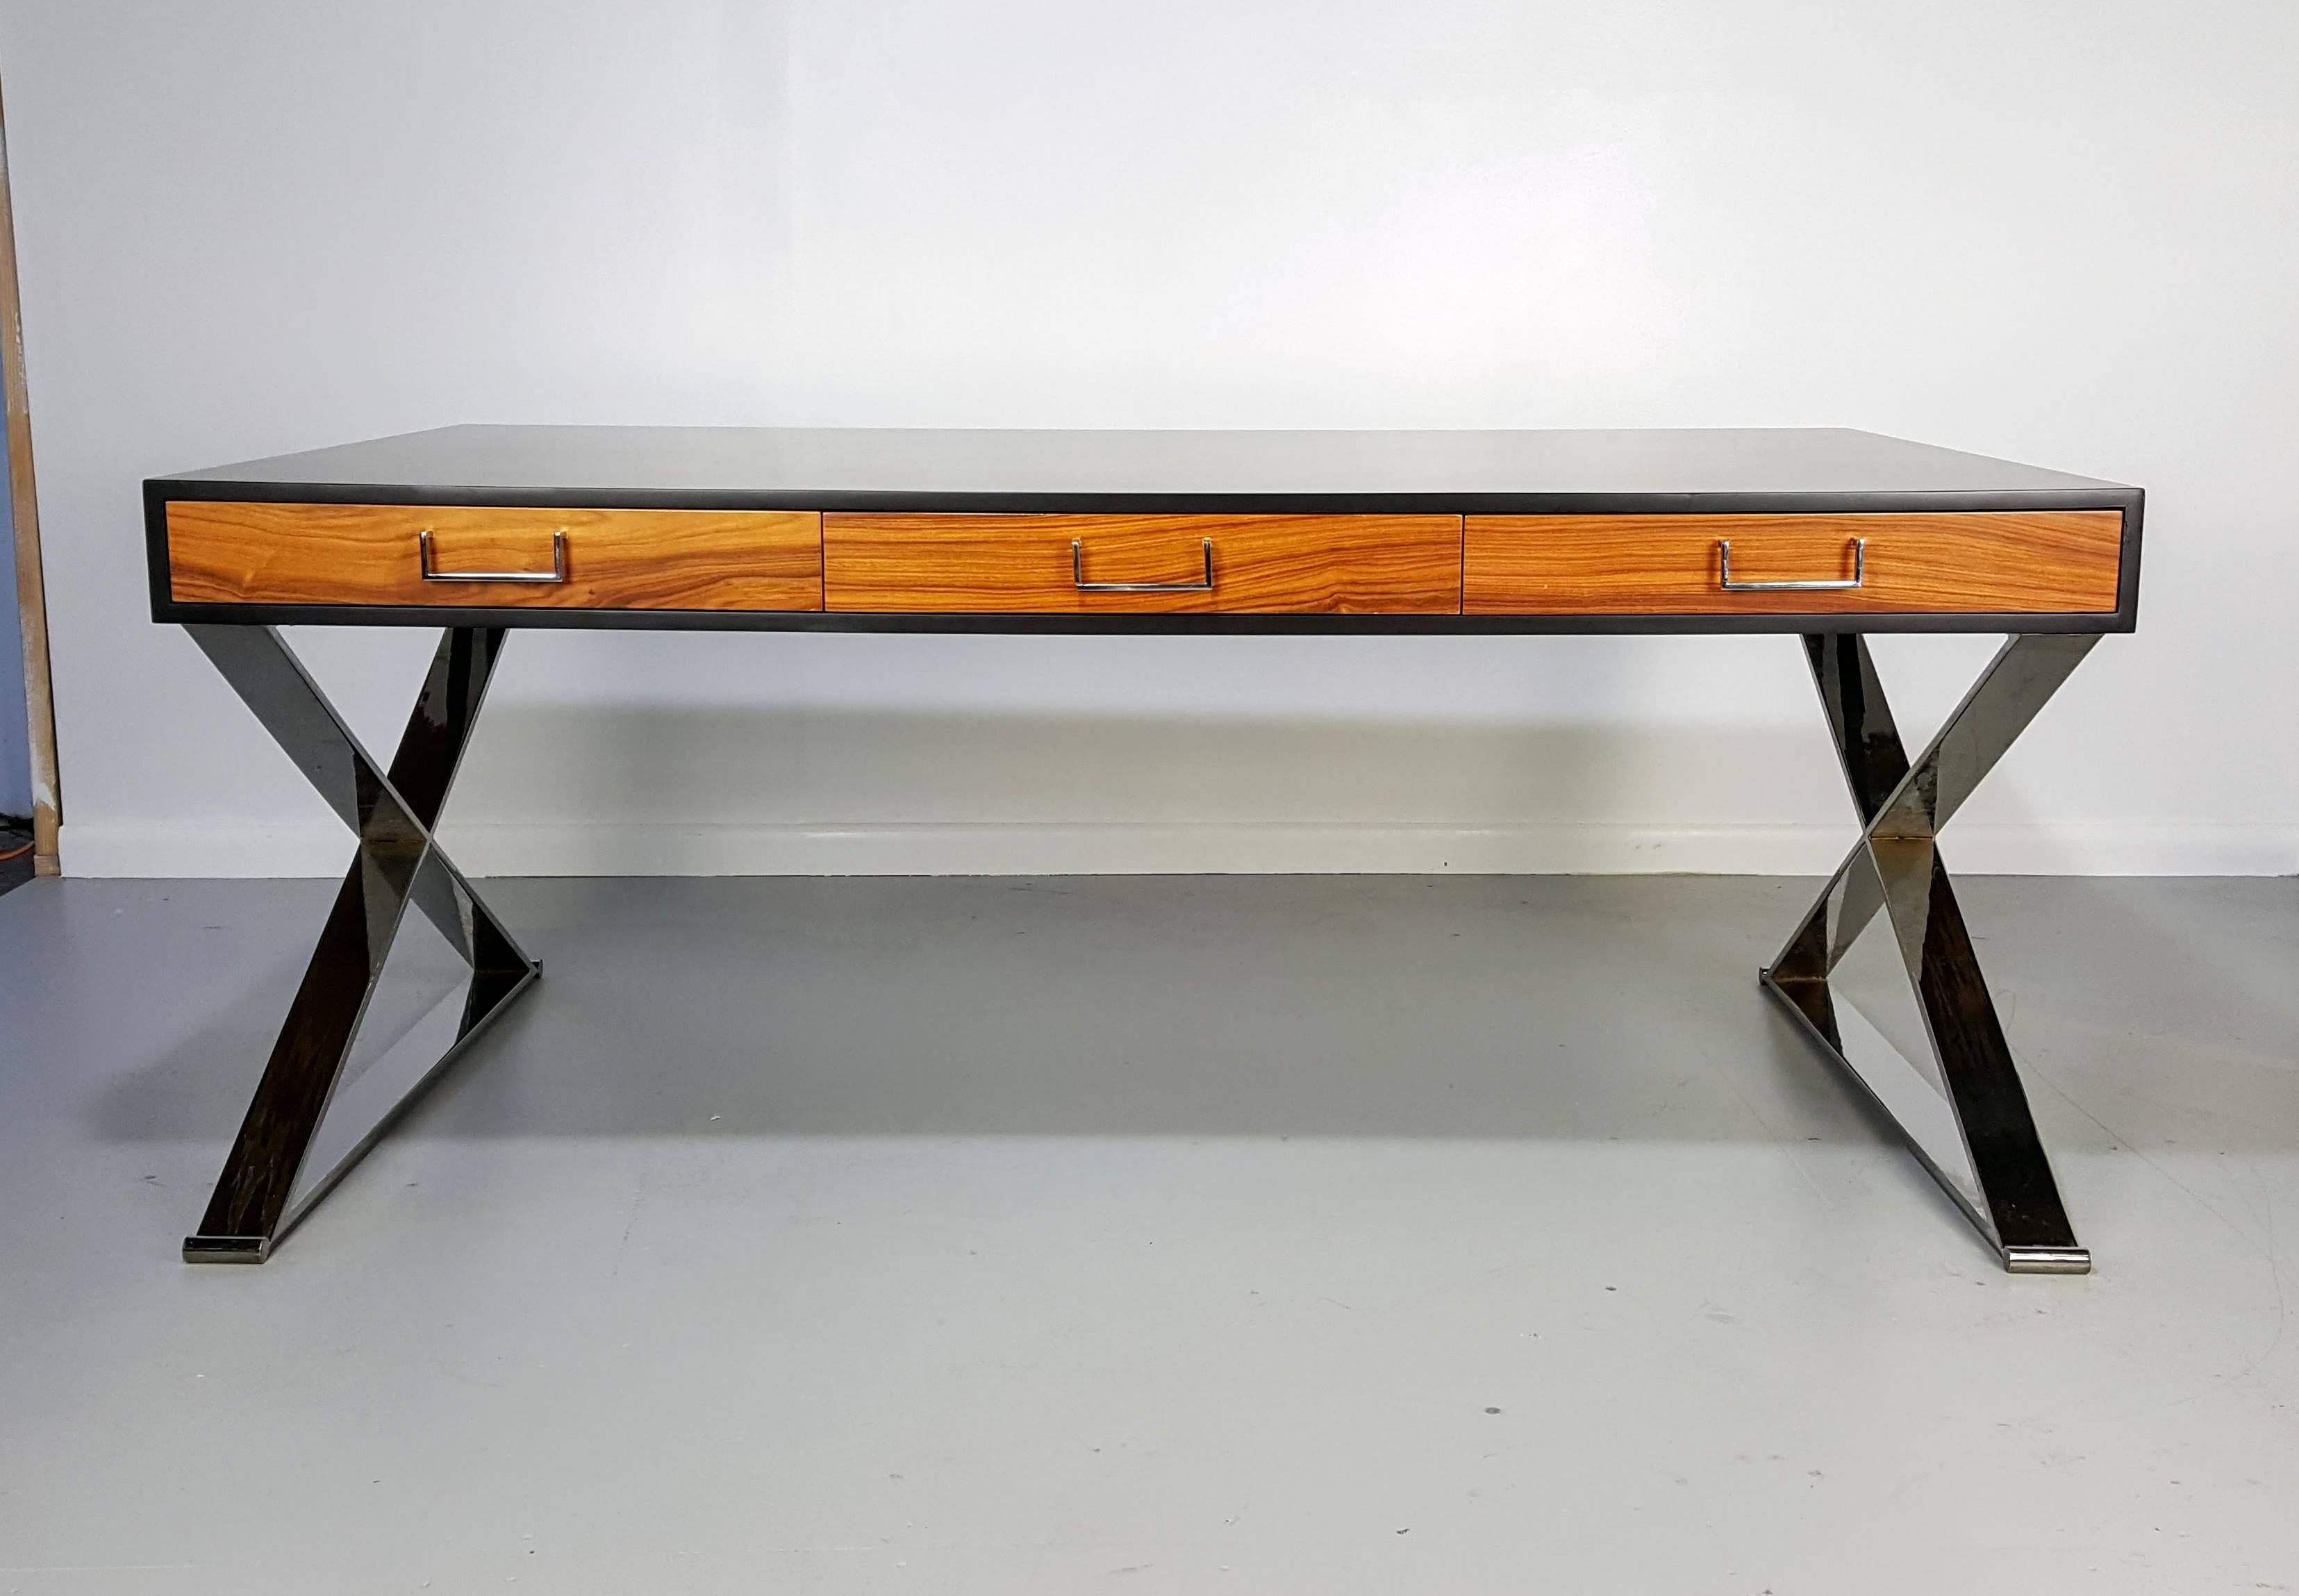 Massive executive desk in lacquer, rosewood and chrome by Milo Baughman, 1970s.

We offer free regular deliveries to NYC and Philadelphia area. Delivery to DC, MD, CT and MA are available if schedule permits, please message for a location-based